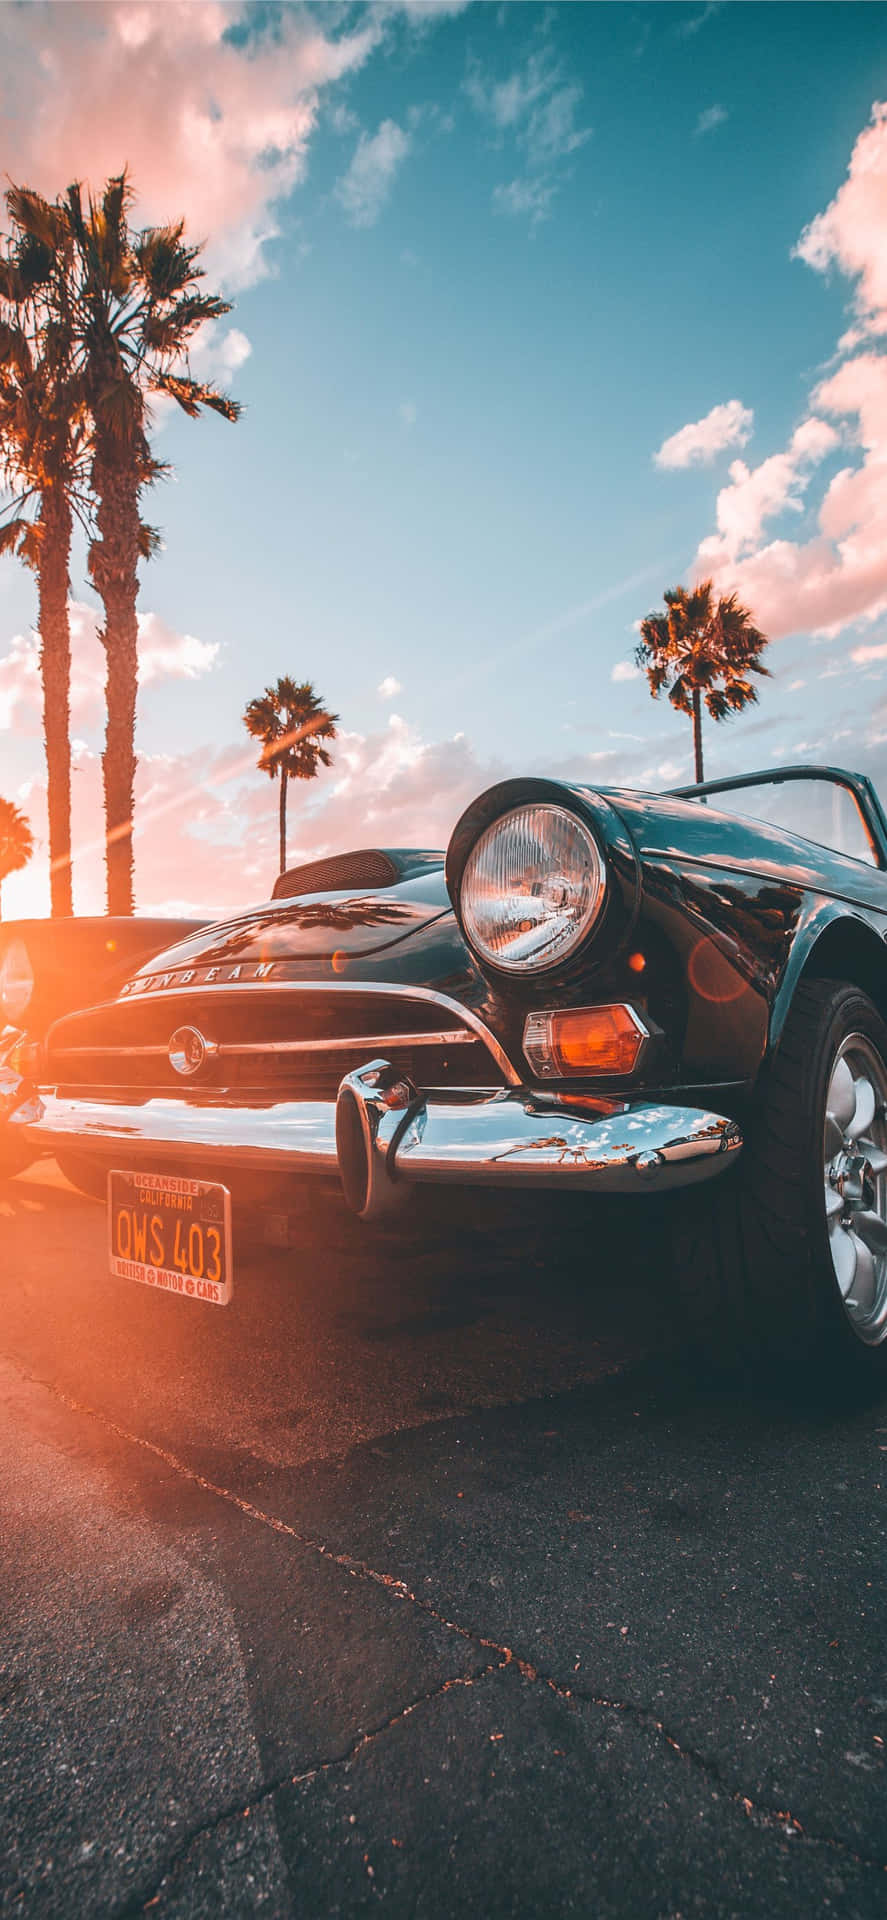 Dreaming of SoCal sunsets Wallpaper